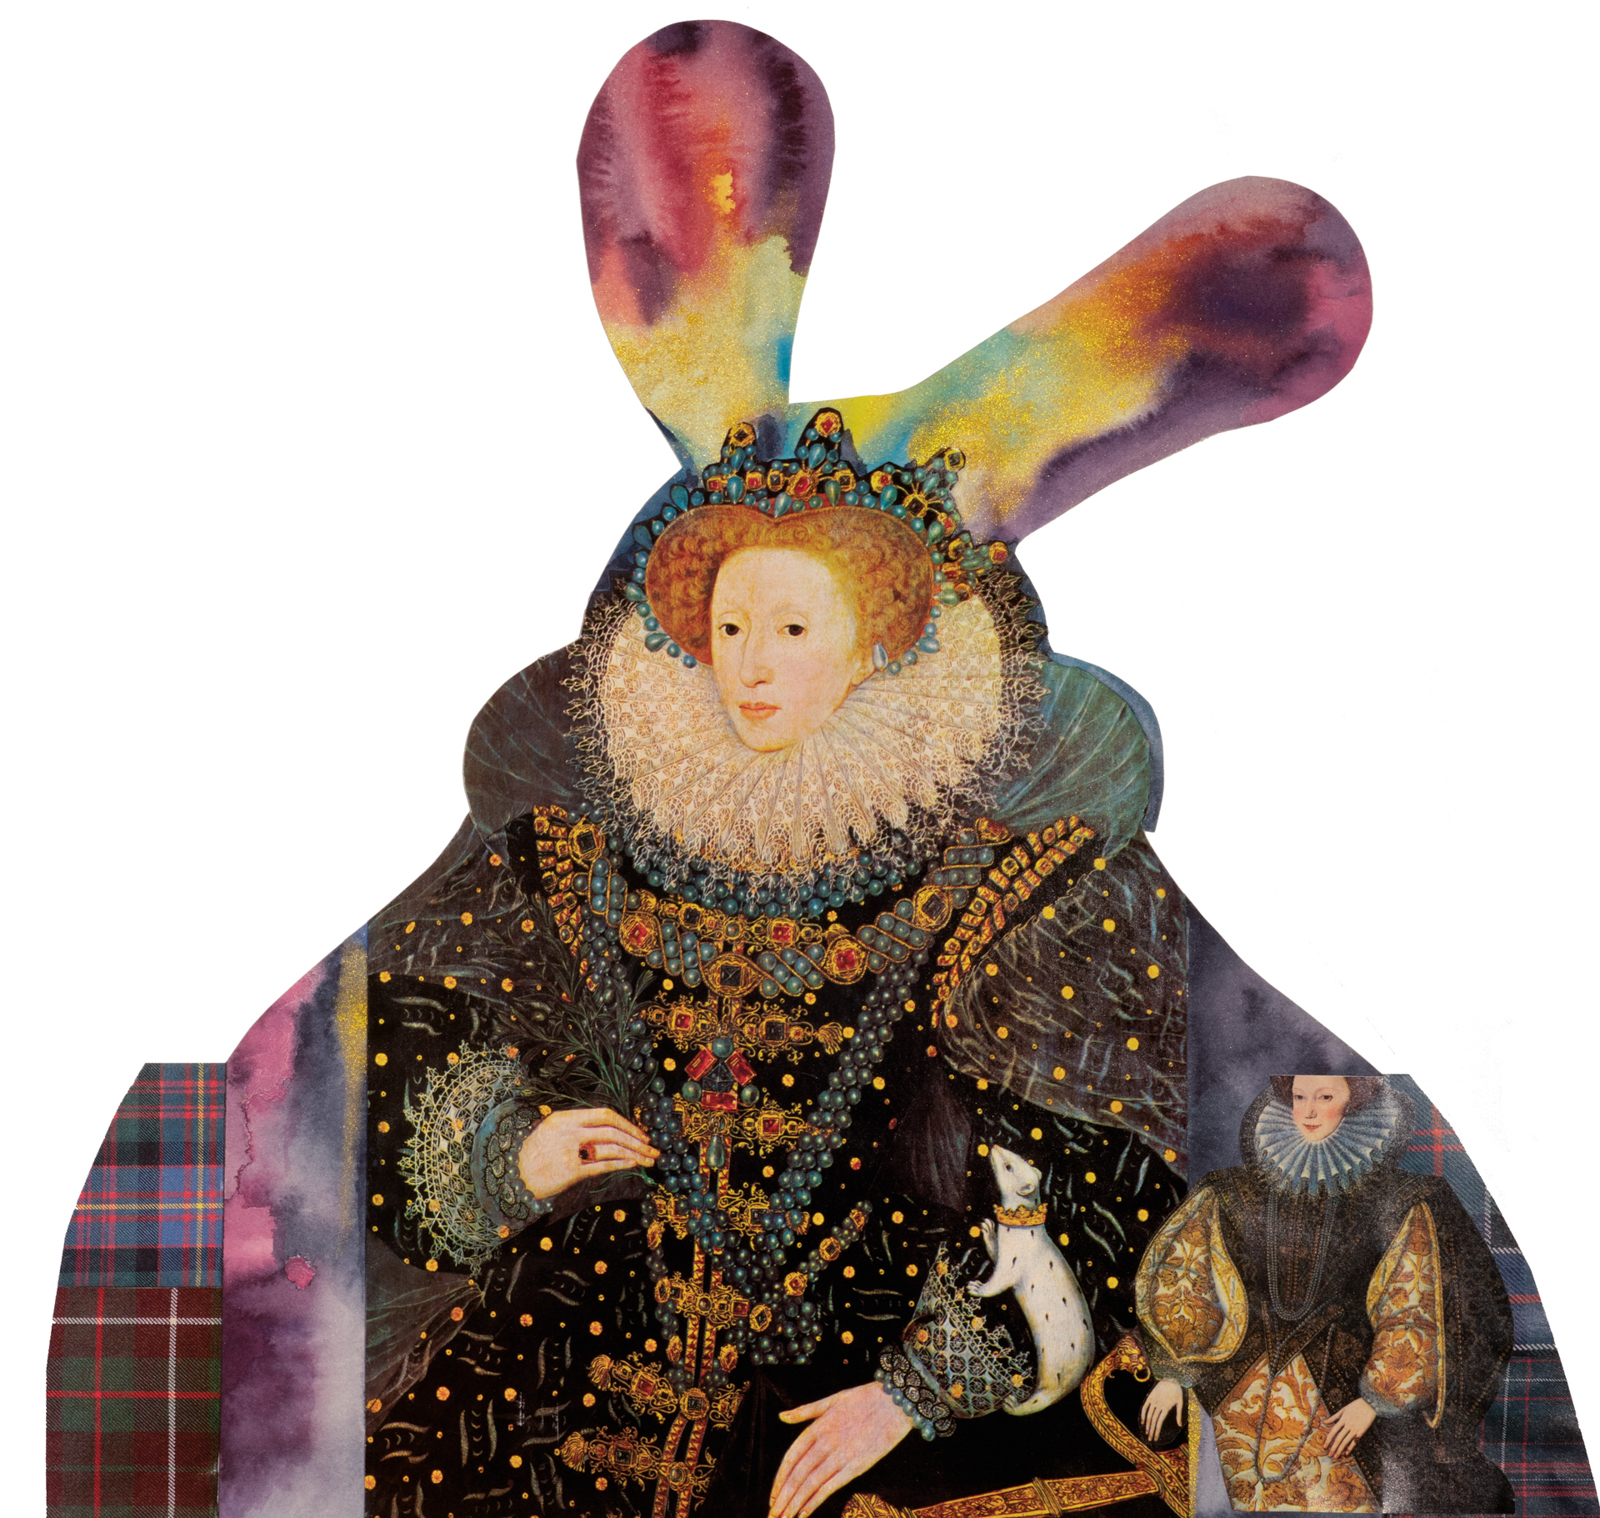 Sonja Ahlers, Rabbit Queen, 2020, mixed media, 16” x 16 1/2”. Courtesy of the artist.